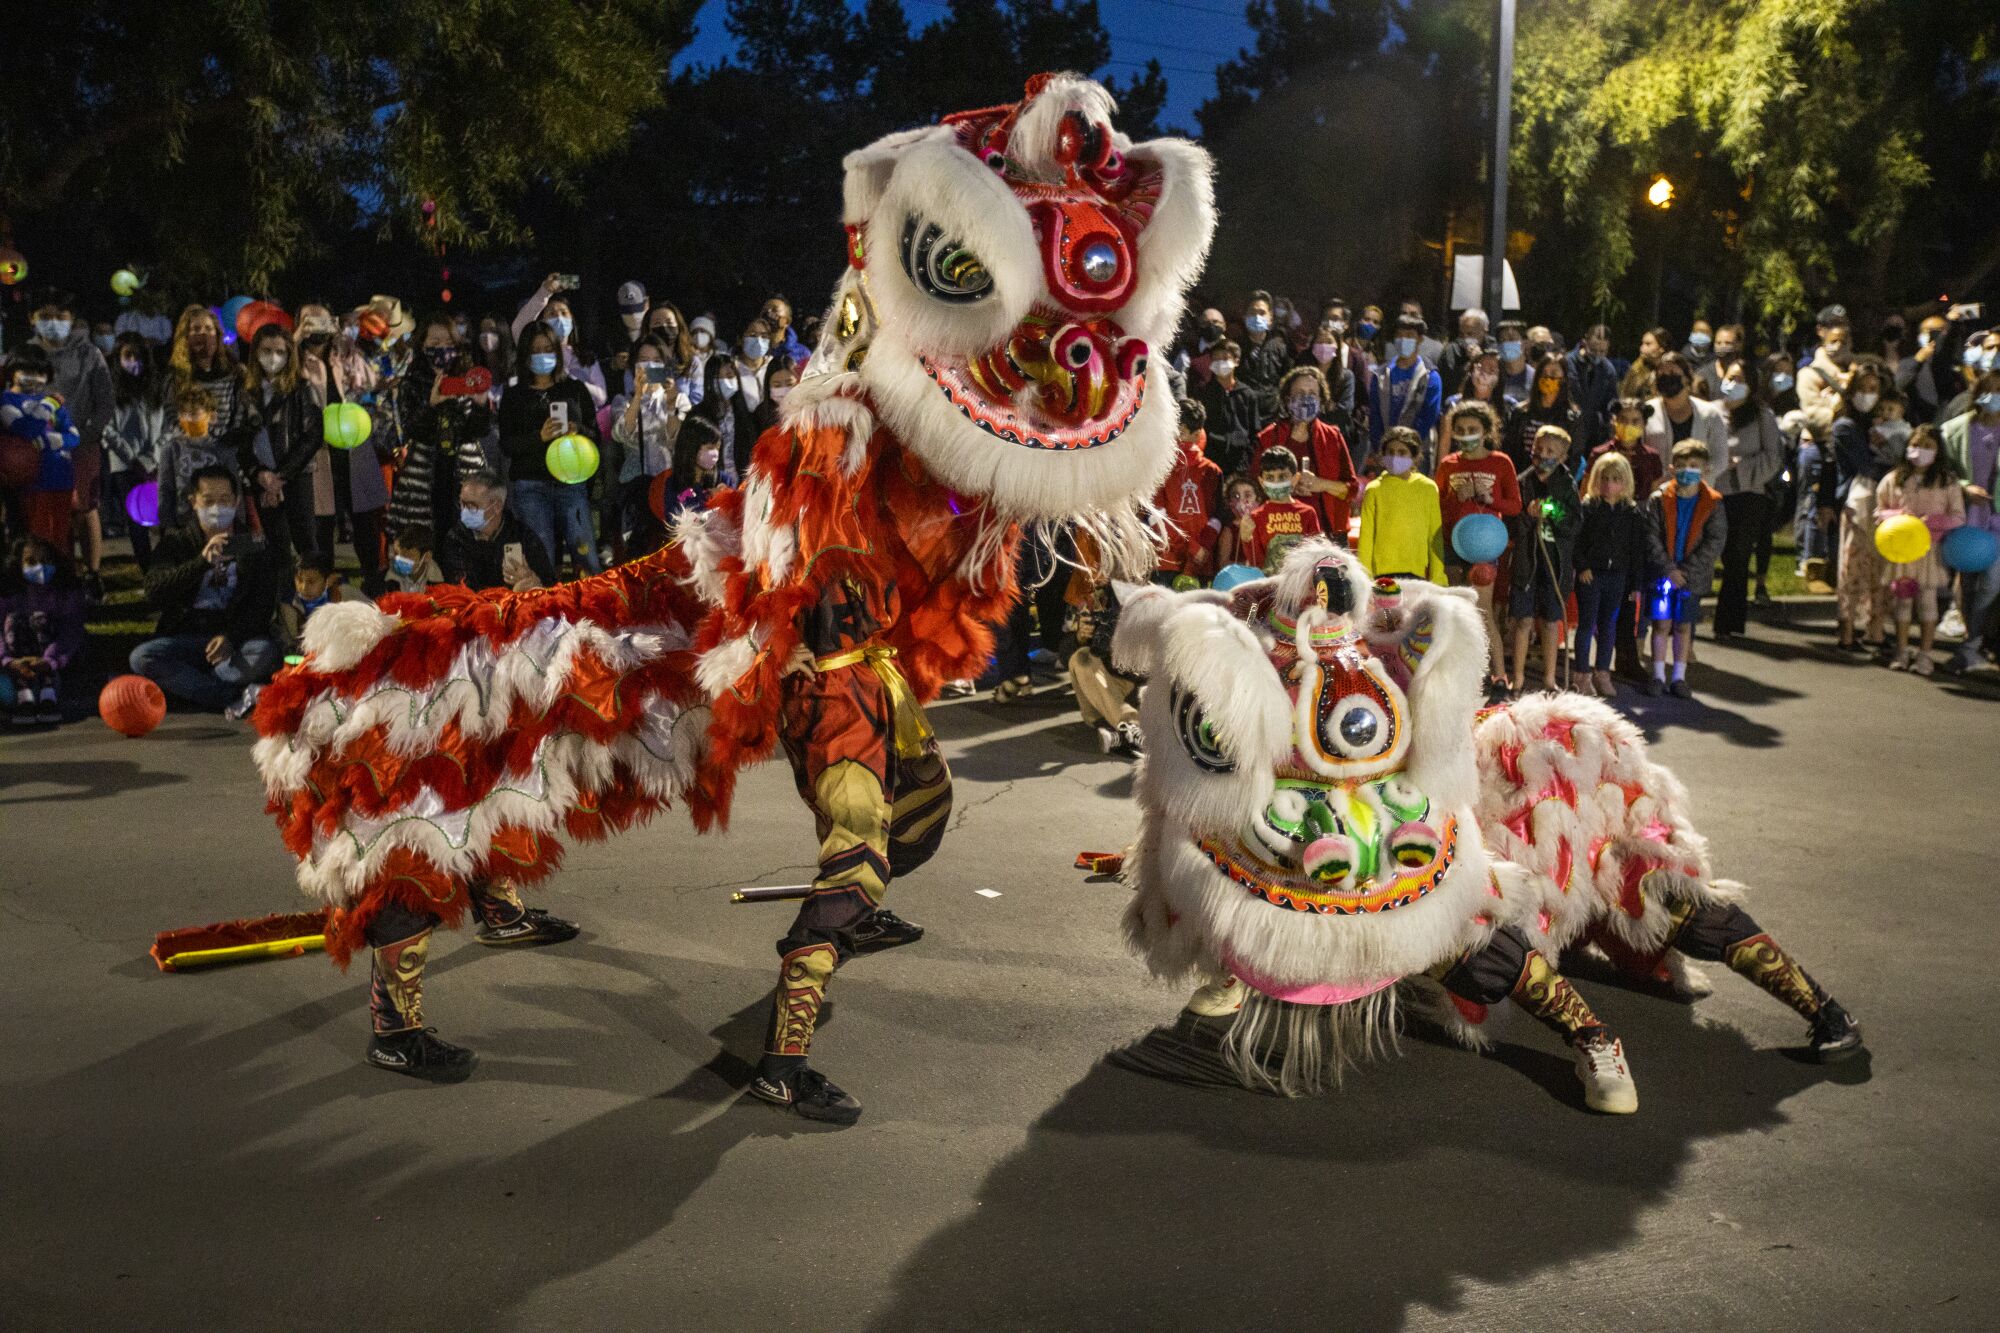 The Qing Wei Lion and Dragon Dance Cultural Troupe performs a lion dance in Ladera Ranch